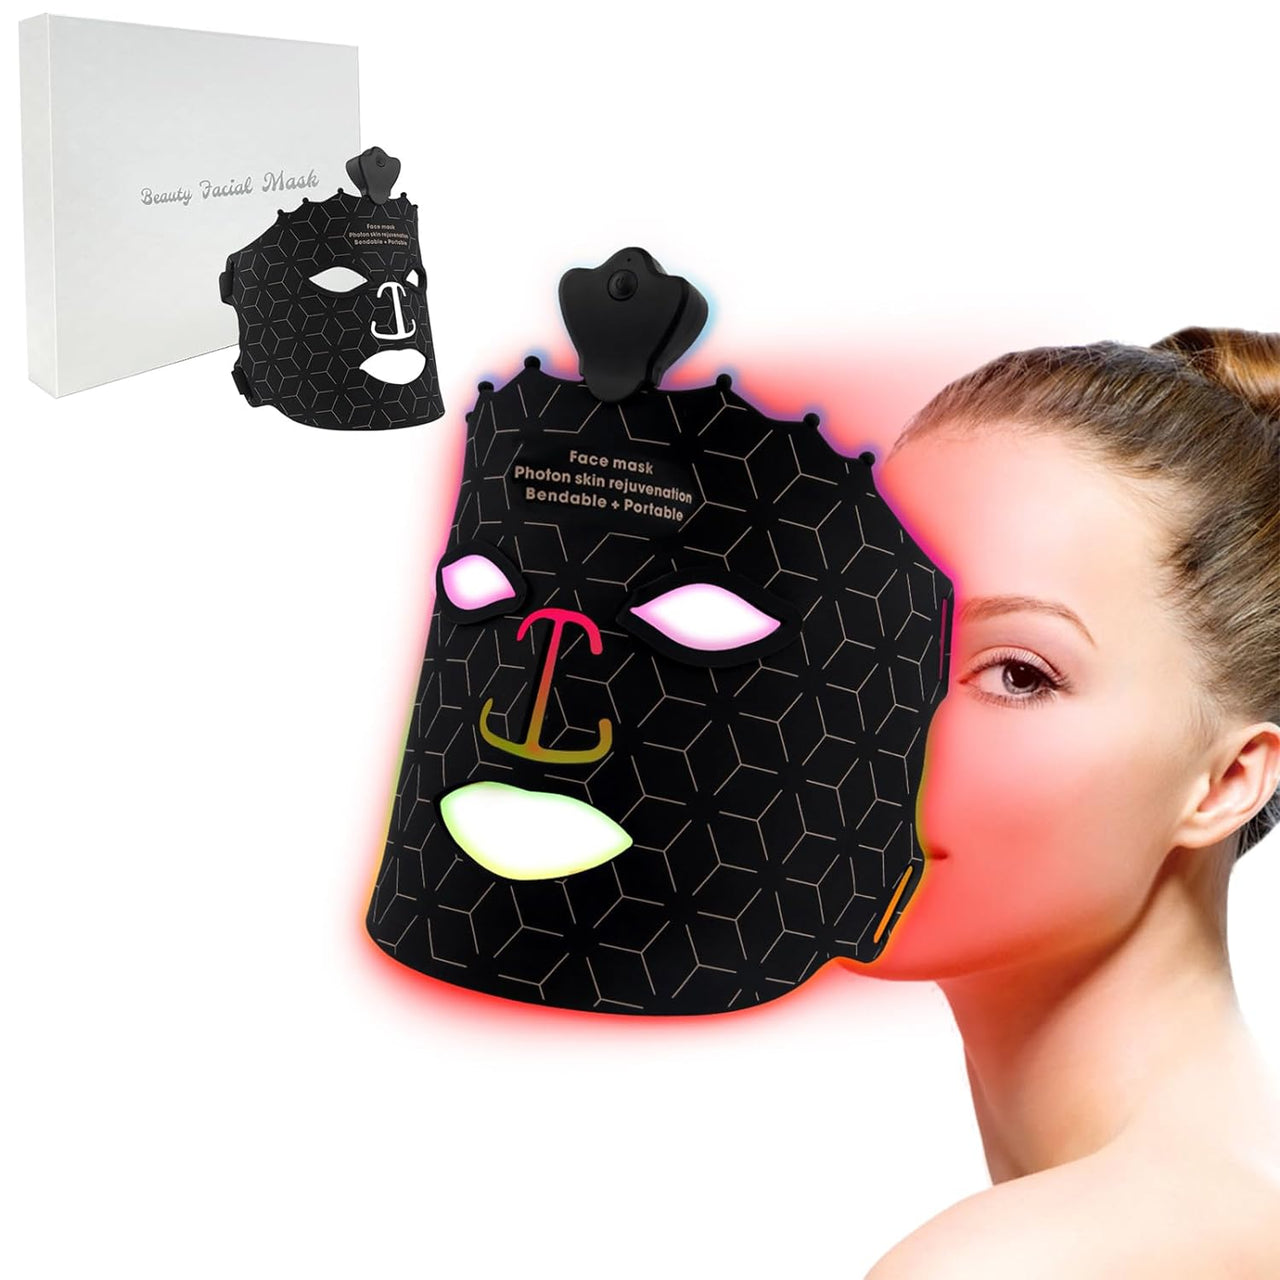 7 Color Red Light Therapy Mask, Wireless LED Face Mask